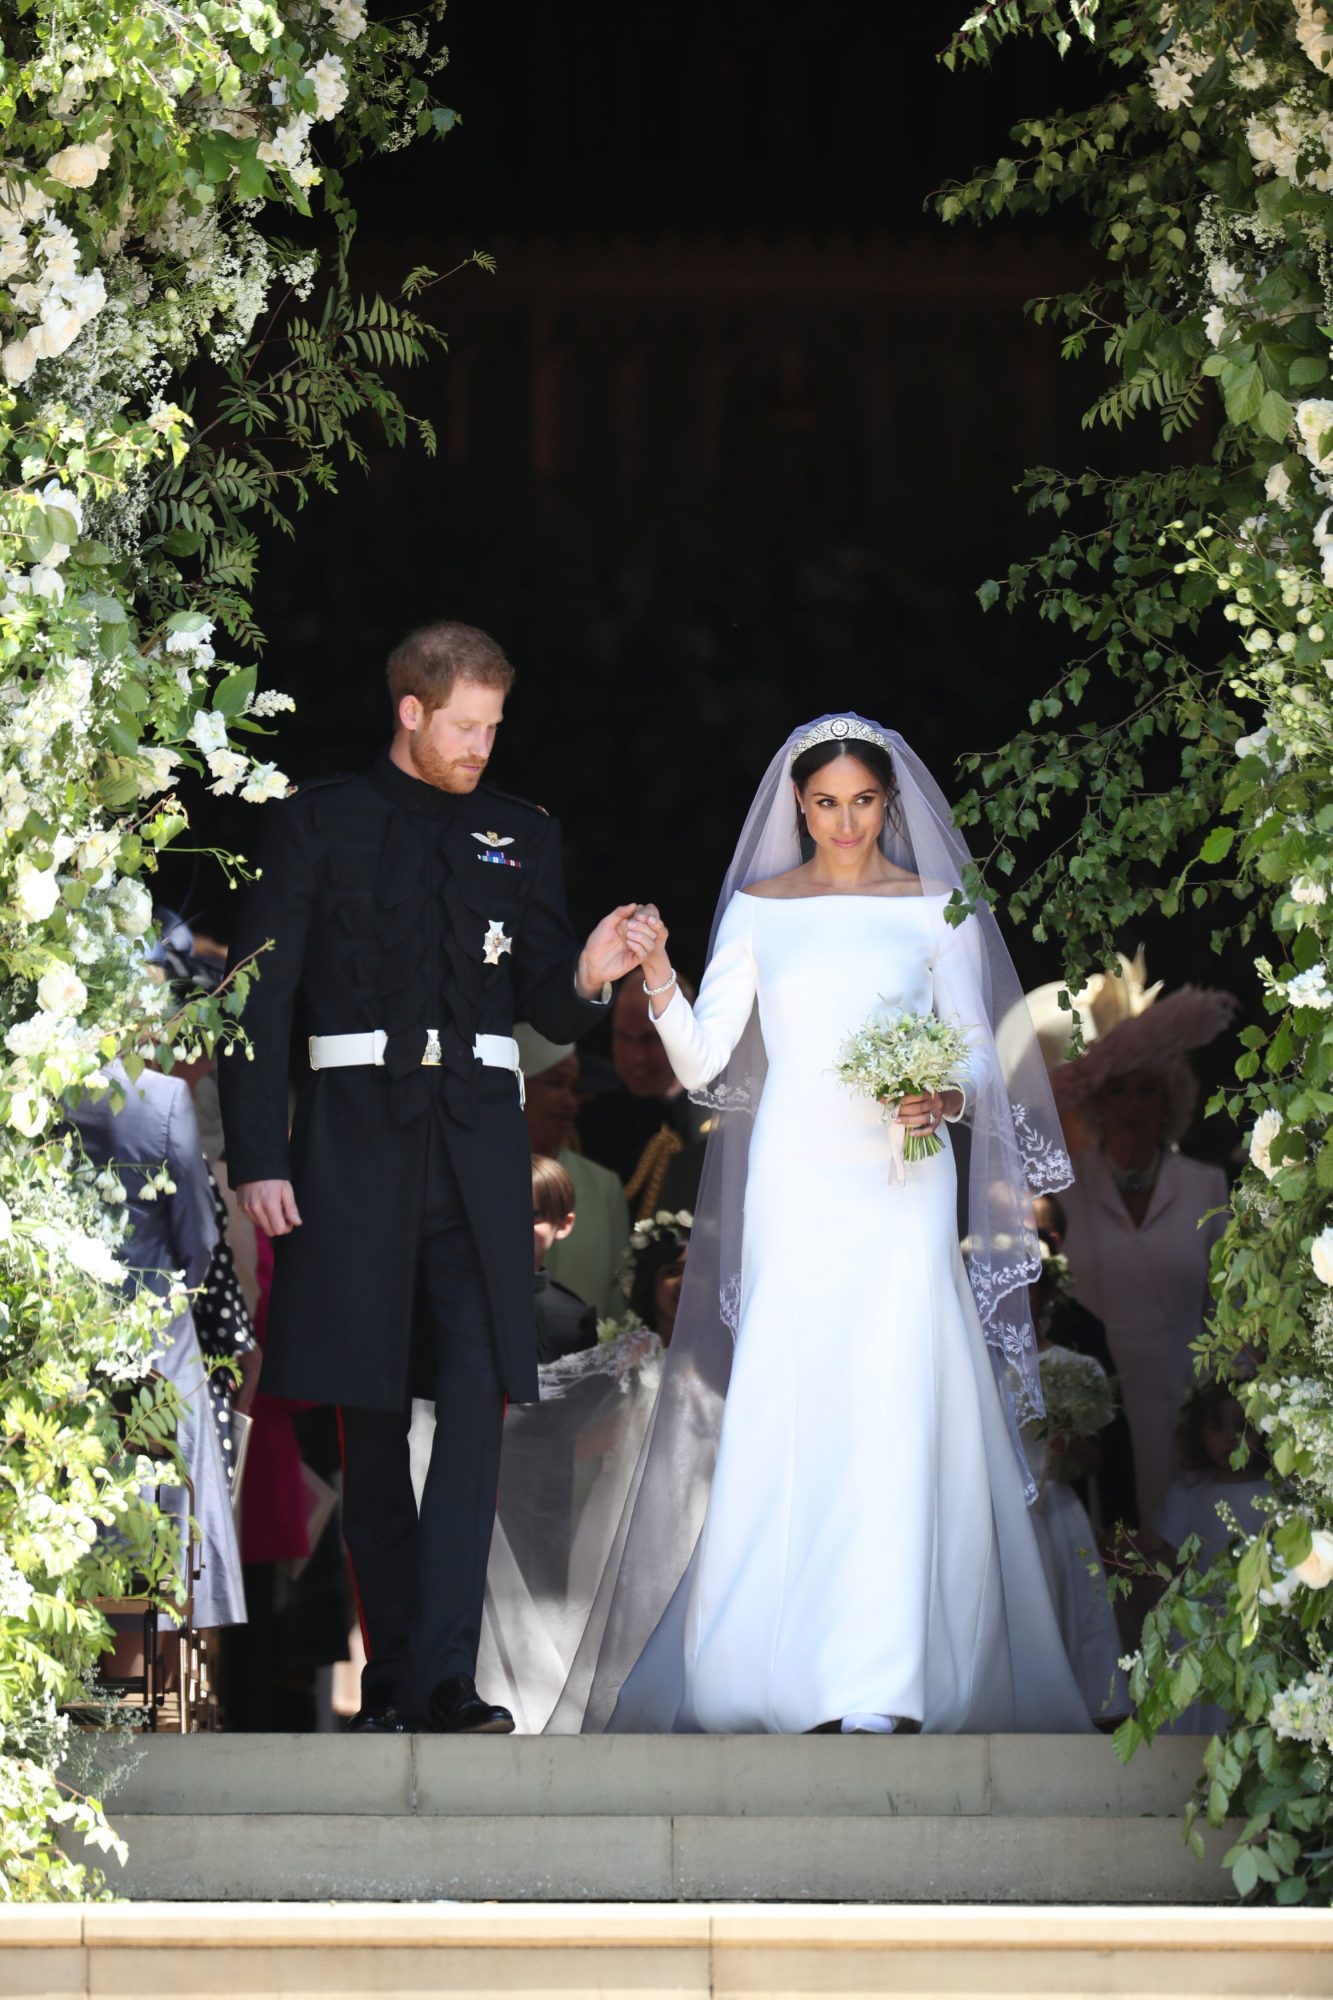 Prince Harry and Megan leave wedding ceremony, megan wears off the shoulder fit and flare wedding dress with matching cathedral veil and diamond tiara